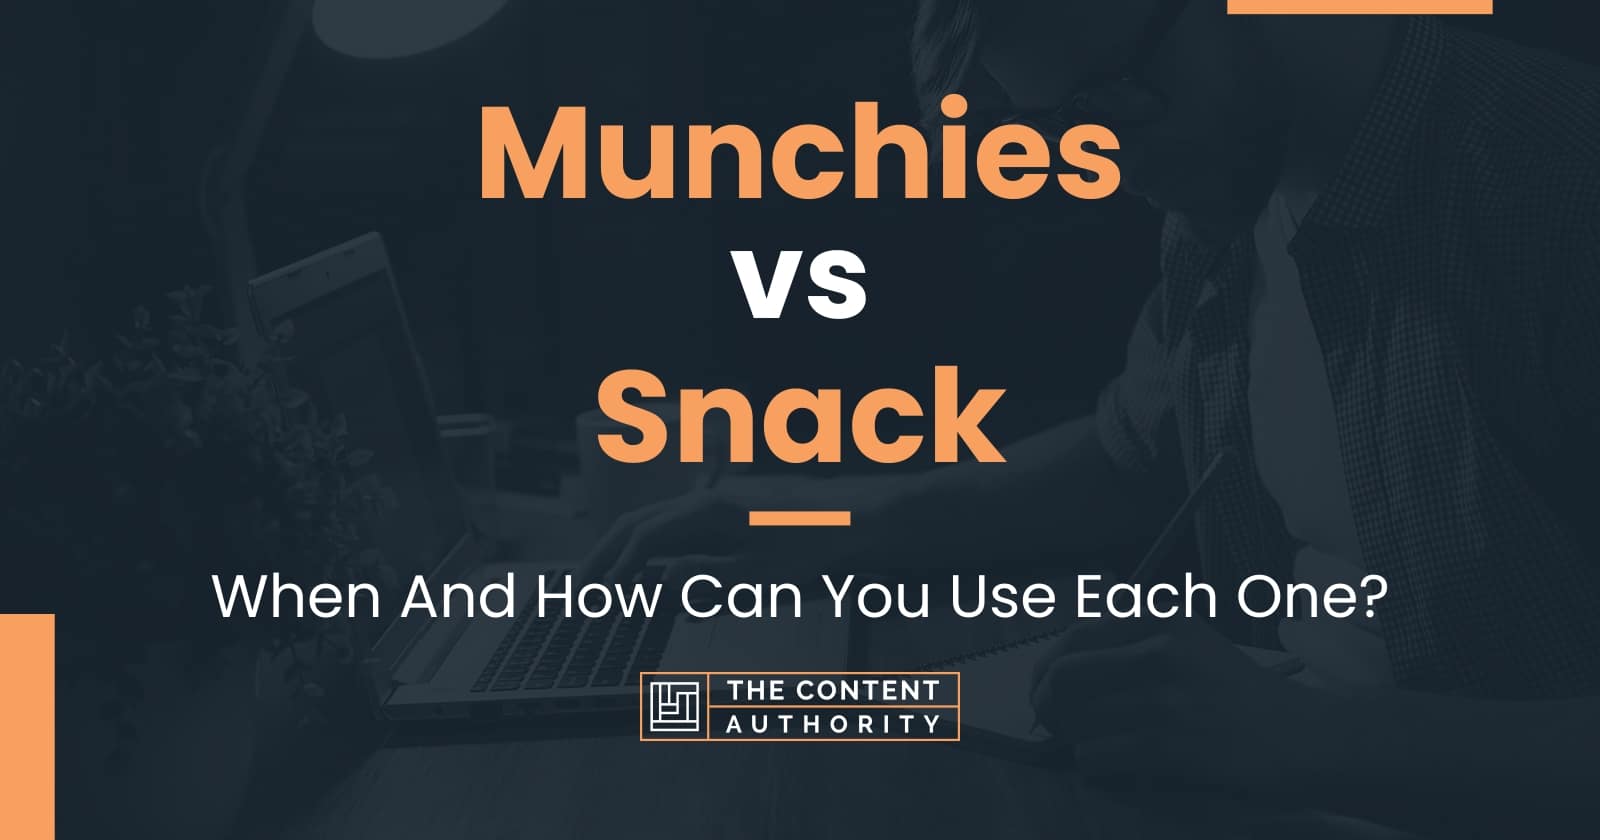 Munchies vs Snack: When And How Can You Use Each One?